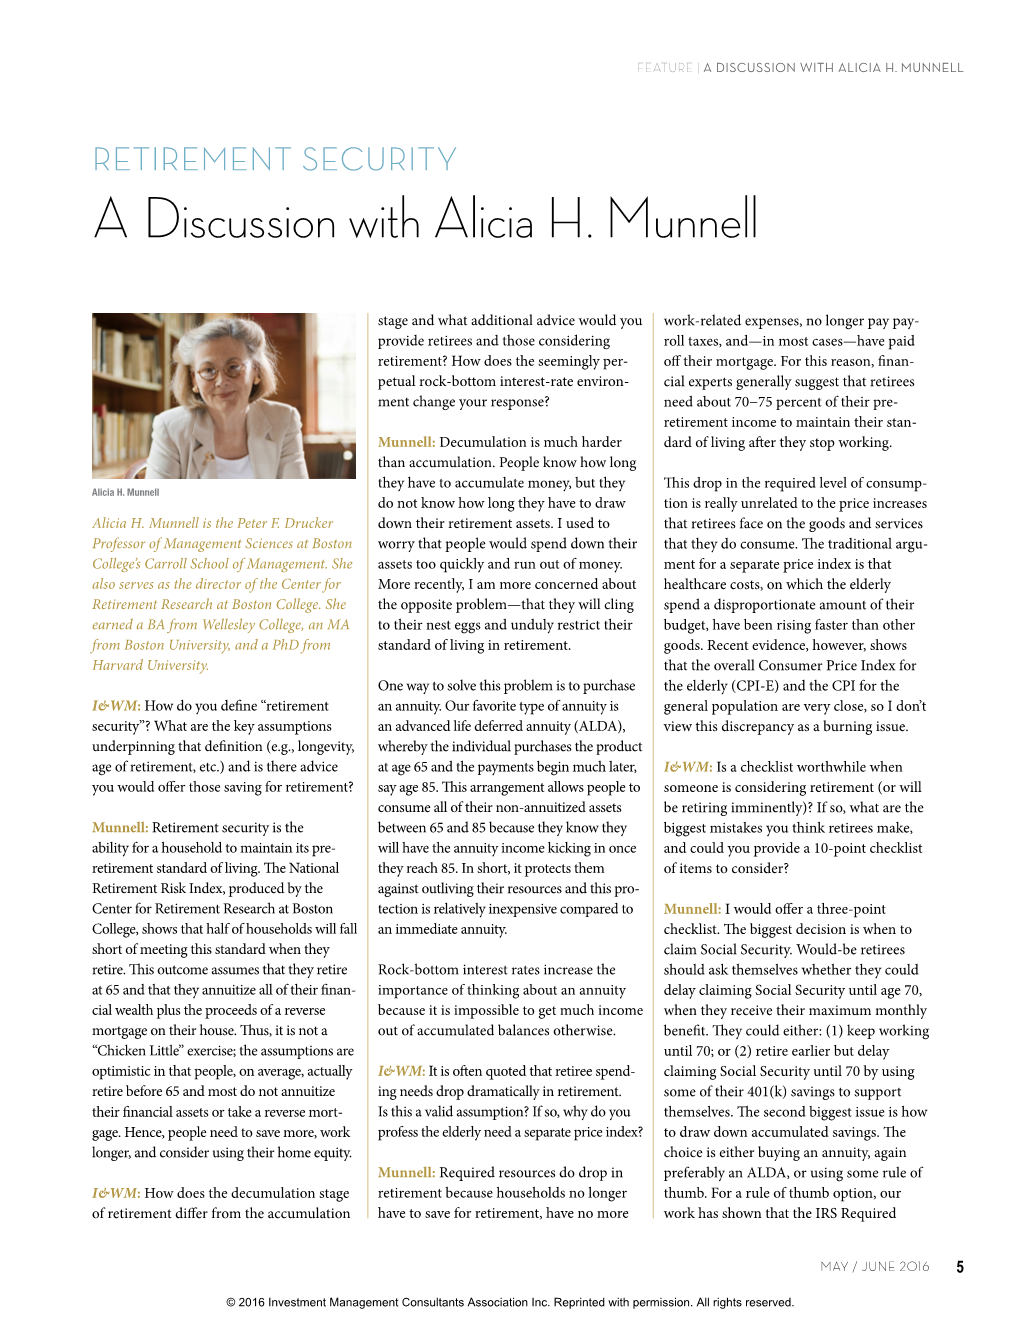 Retirement Security: a Discussion with Alicia H. Munnell